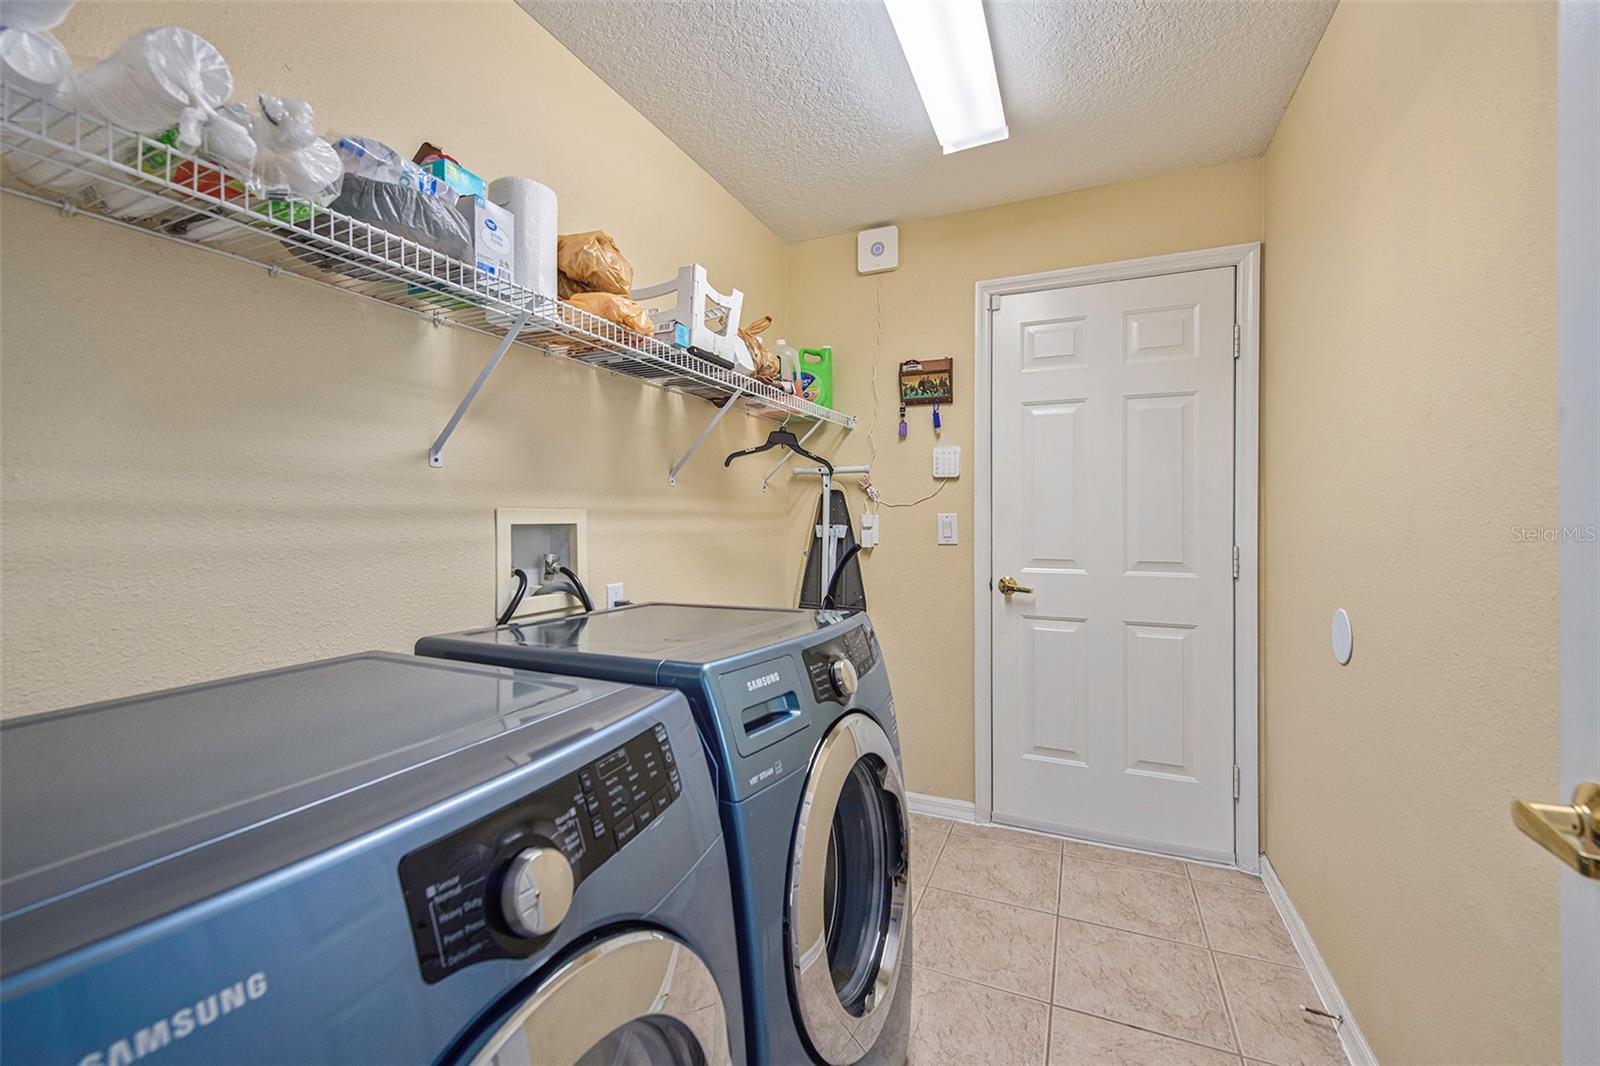 Laundry room and garage entrance